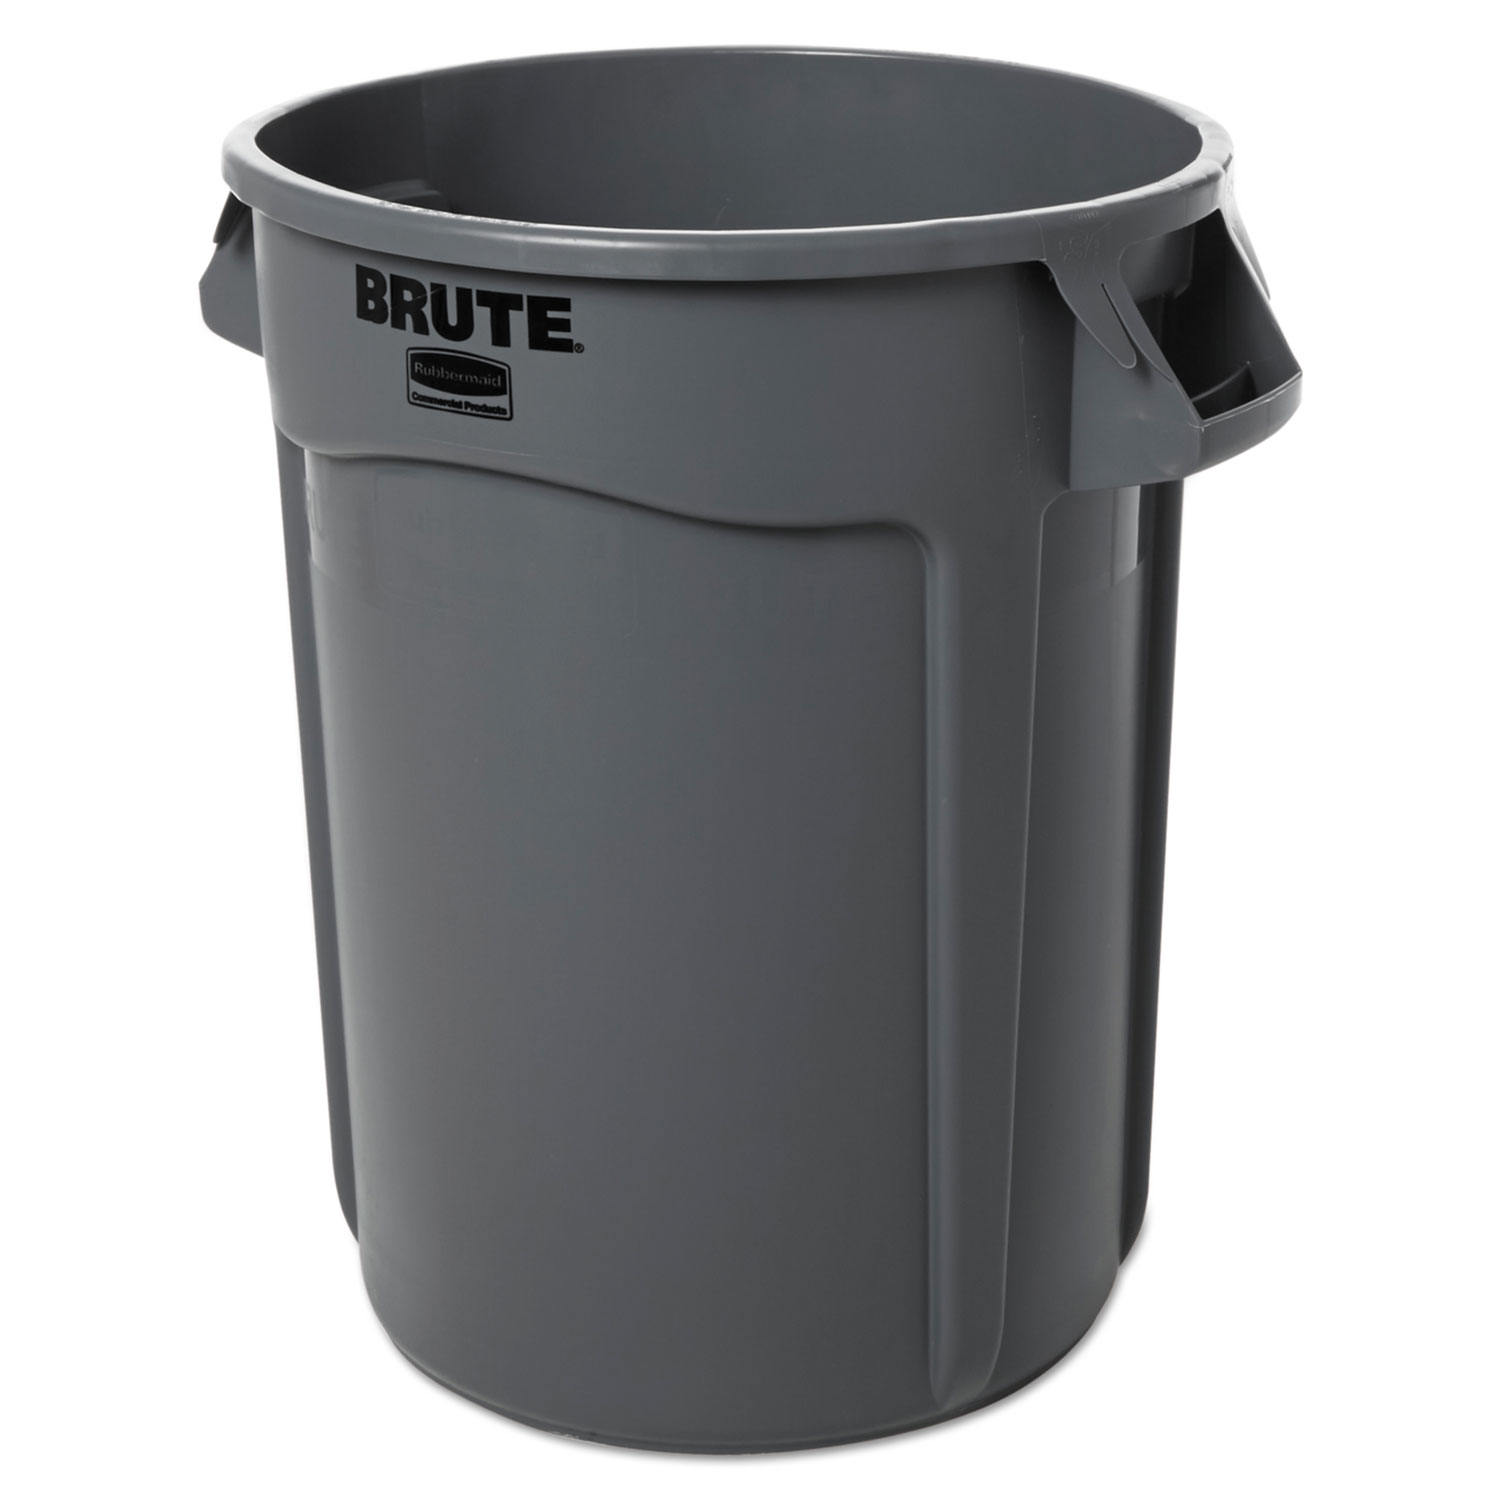 Rubbermaid Round Brute Container - RCP263200GY 